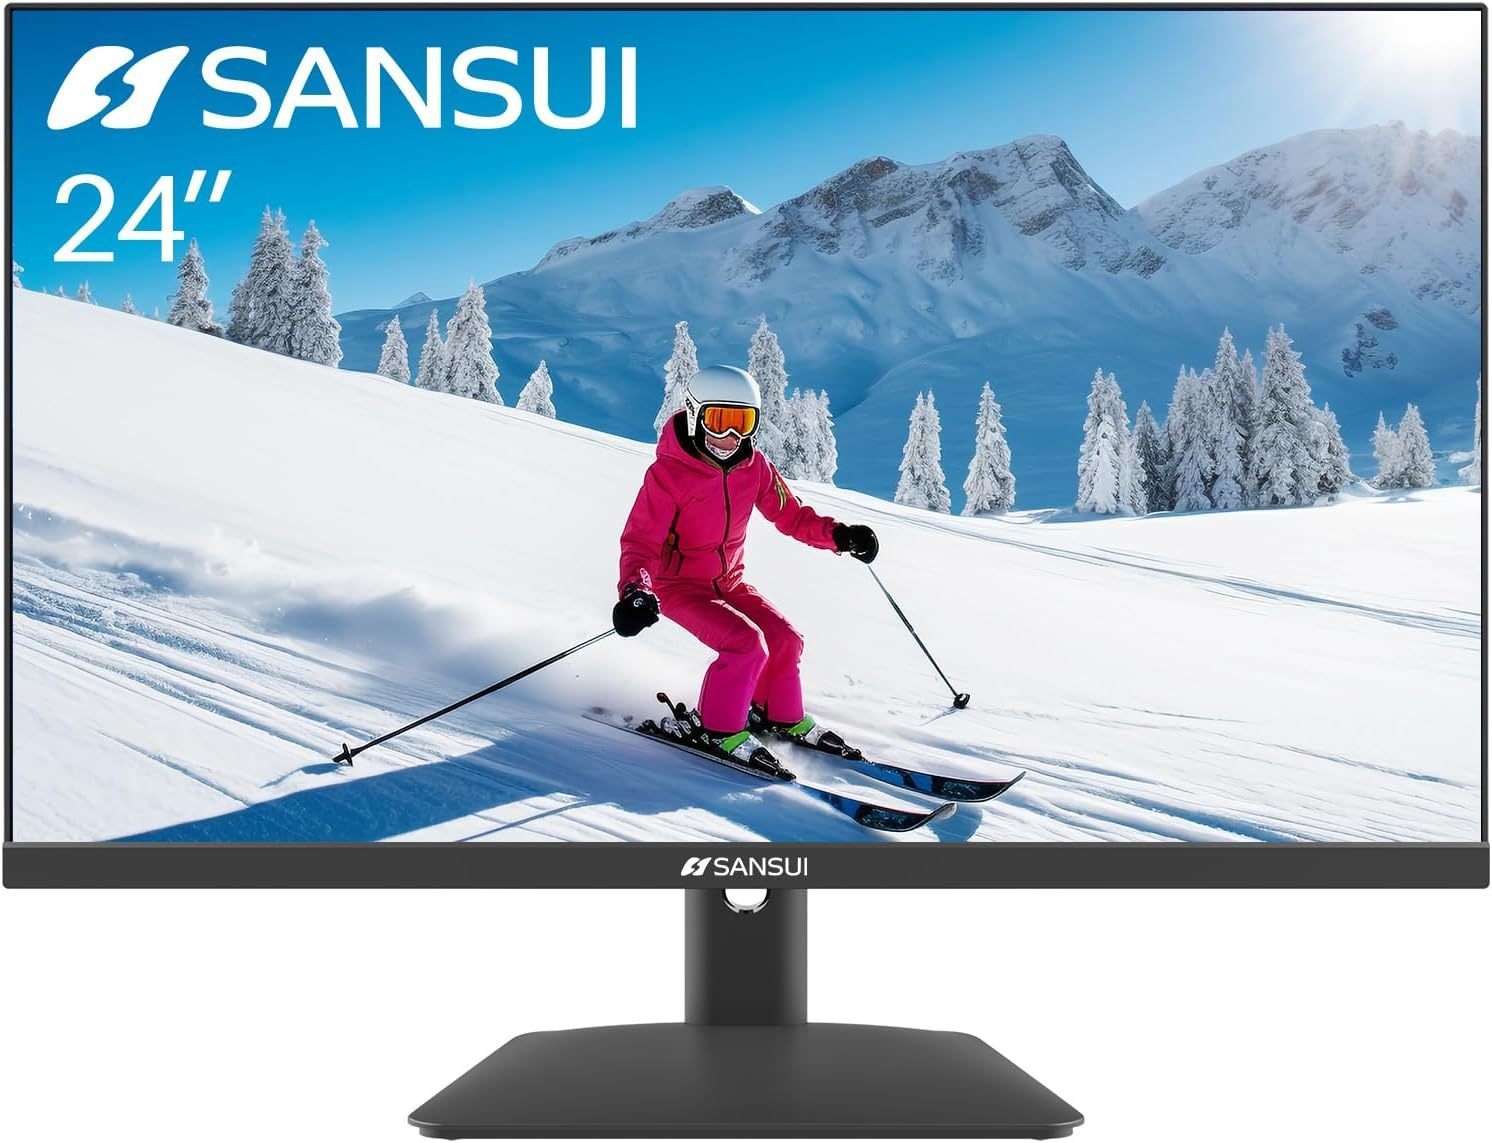 Sansui 24 inch IPS FHD 1080P 75HZ HDR10 Computer Monitor with HDMI, VGA,DP Ports Frameless/Eye Care/Ergonomic Tilt/Speakers Built-in(ES-24X5A HDMI Cable Included)